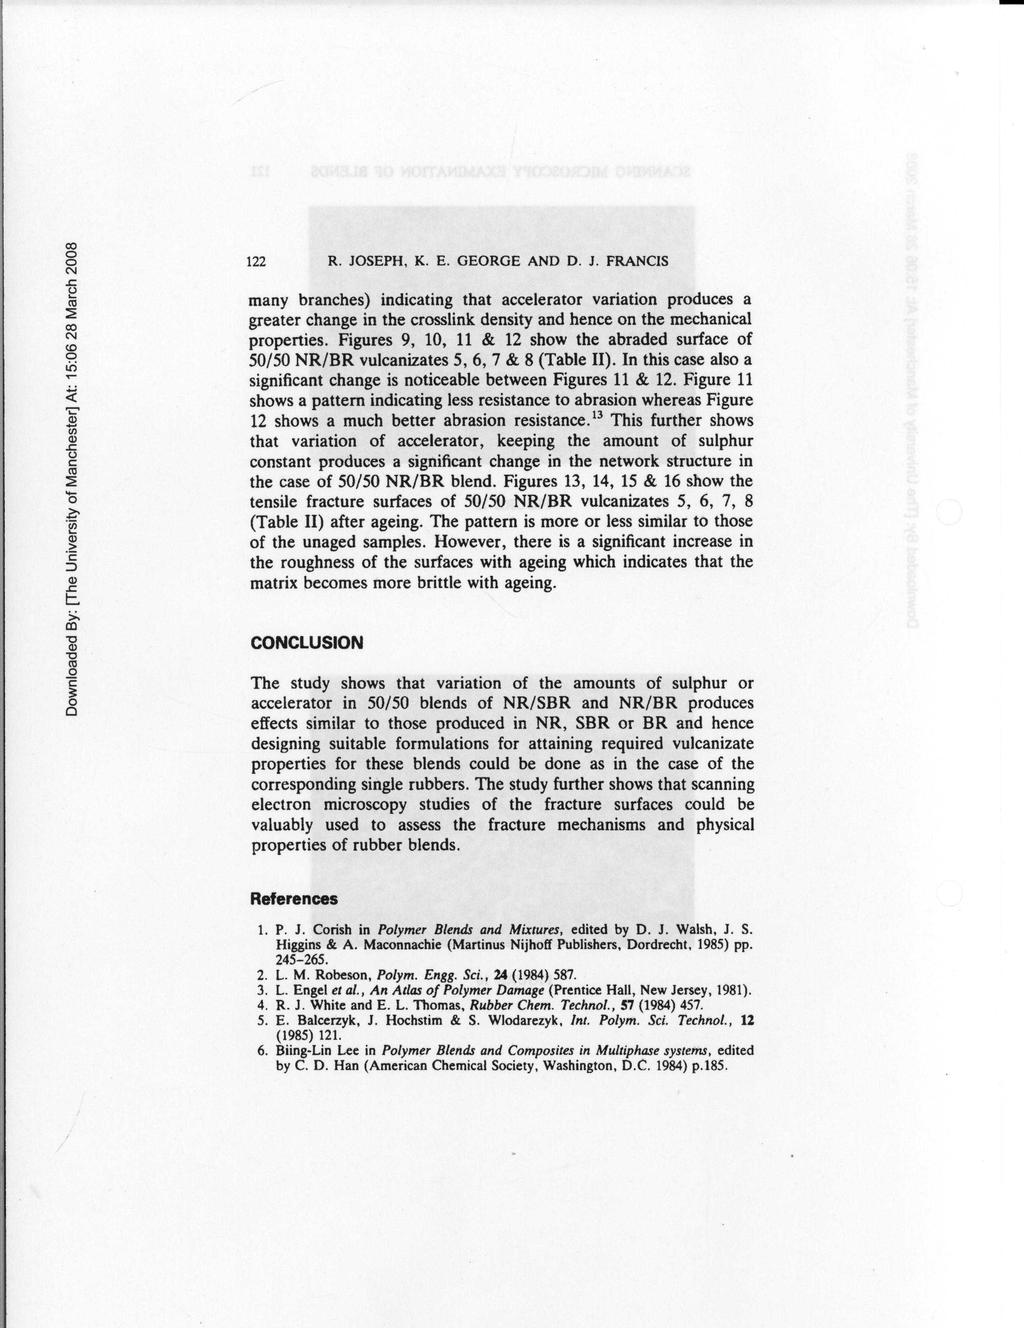 122 R. JOSEPH, K. E. GEORGE AND D. J. FRANCIS many branches) indicating that accelerator variation produces a greater change in the crosslink density and hence on the mechanical properties.